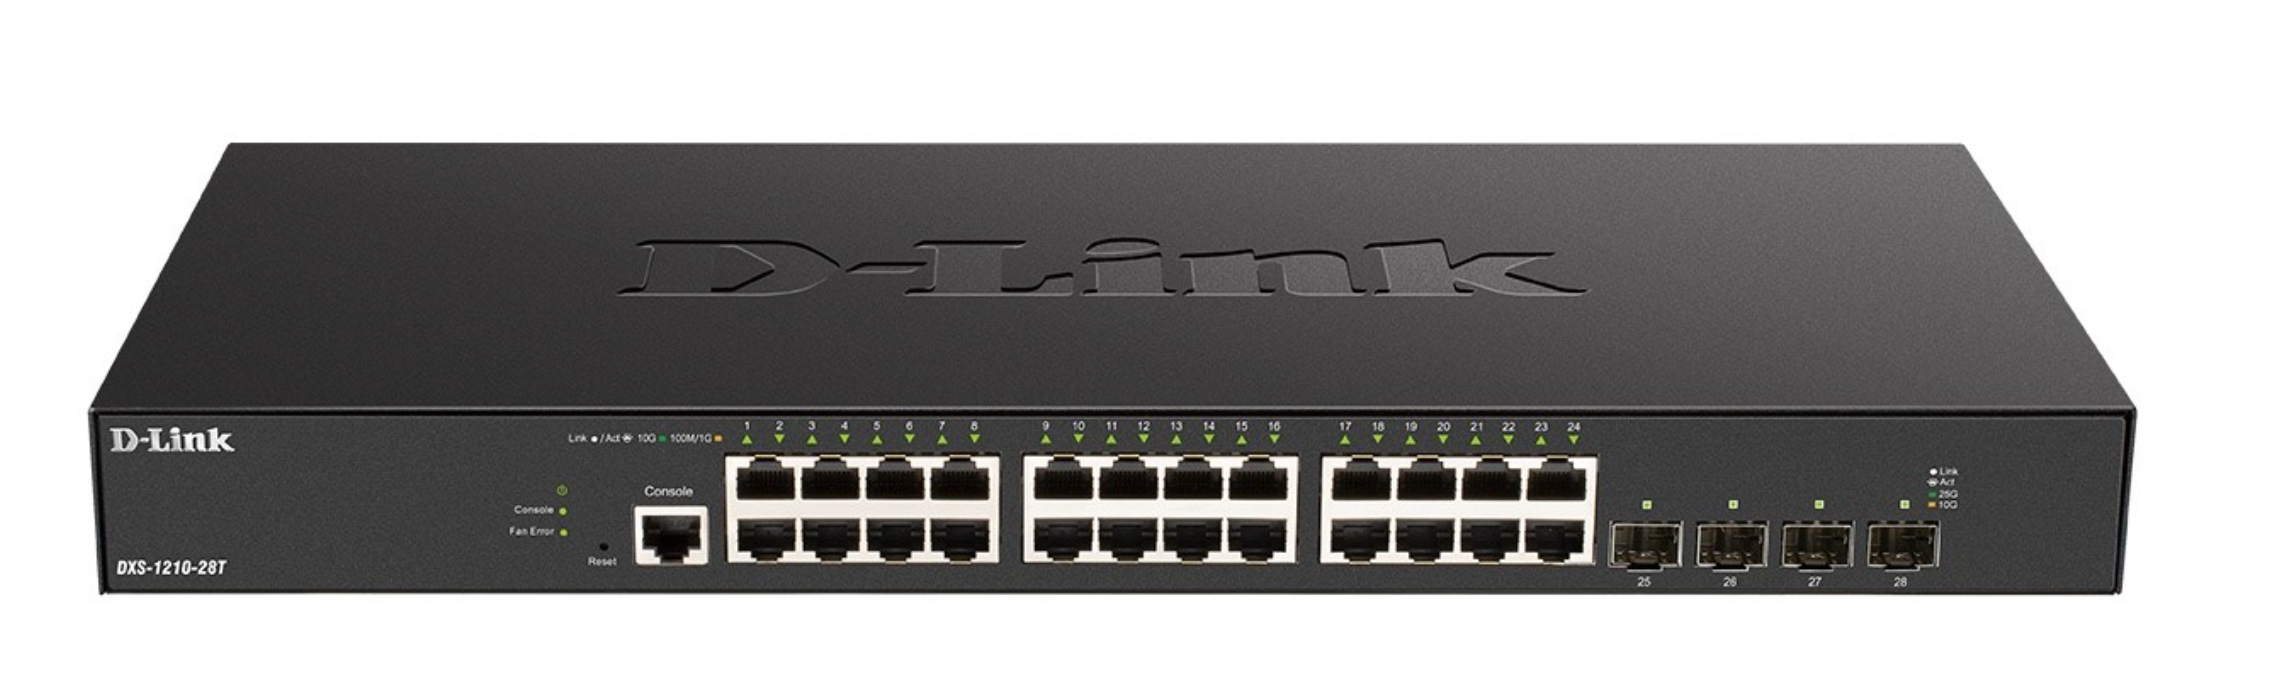 28t 10 Gigabit Smart Managed Switches From D Link